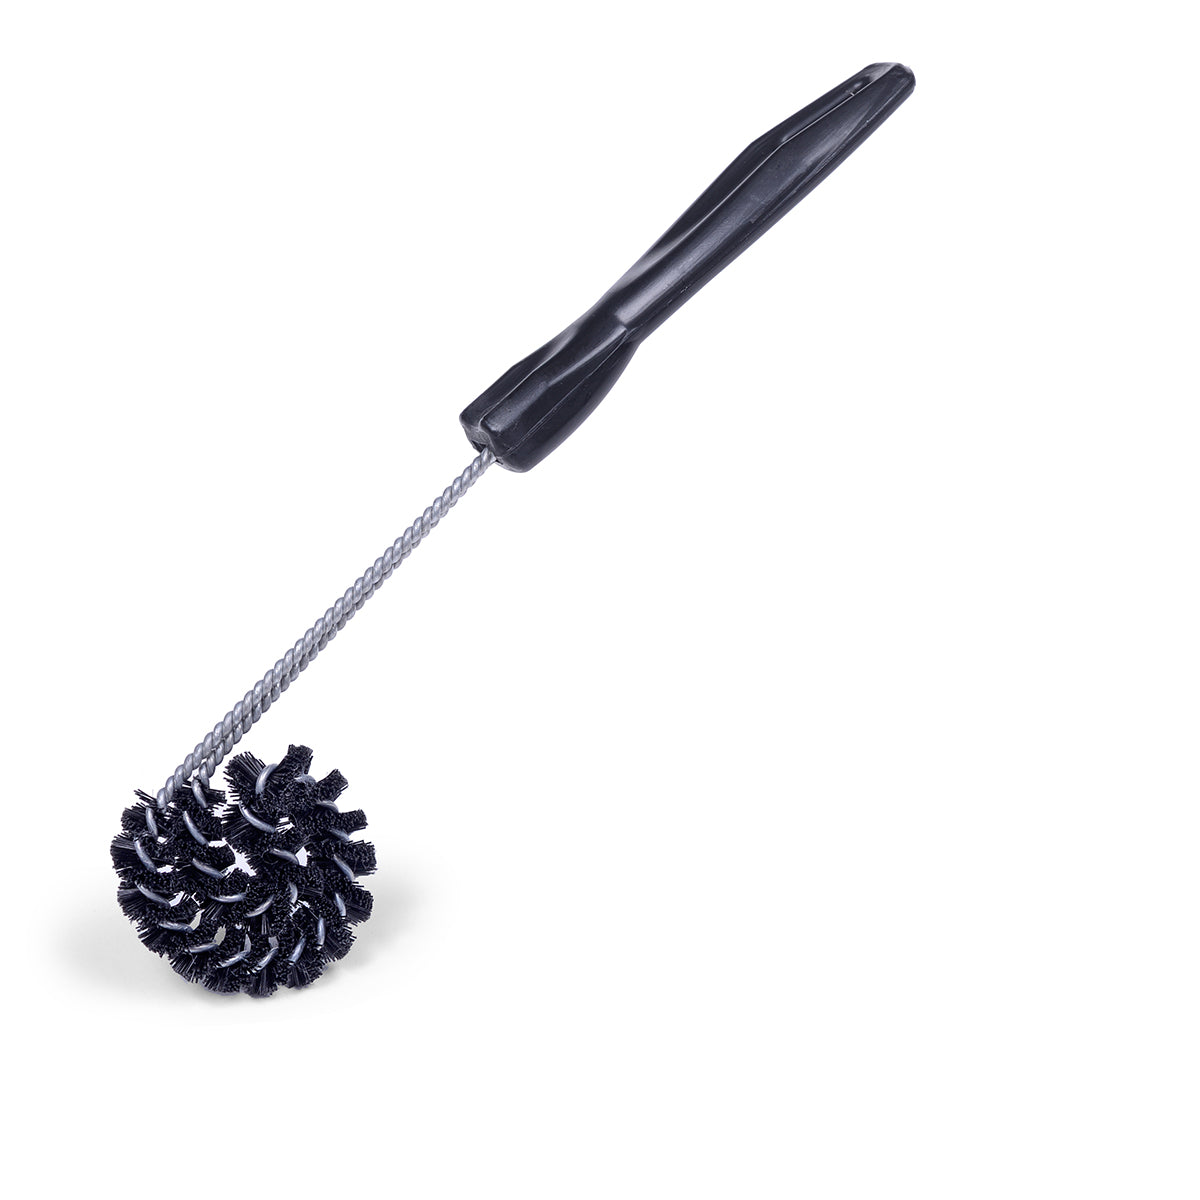 Sliding Trench Door Window Track Cleaning Brush U Shape Crack Notch Cleaner  Tool